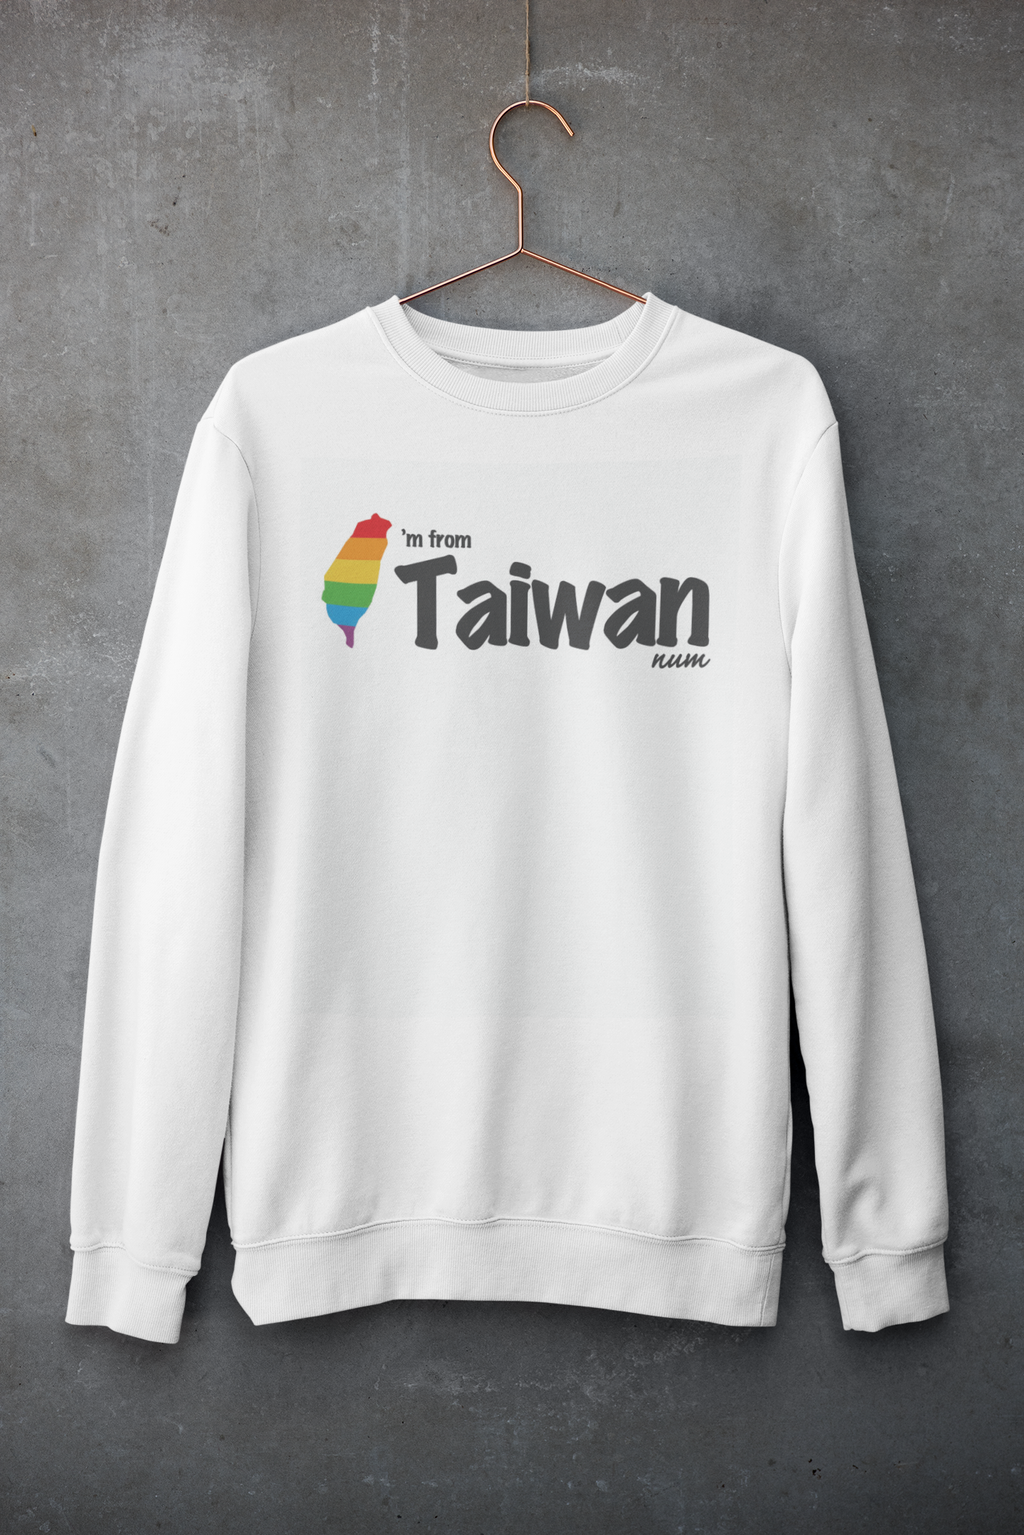 mockup-of-a-customizable-crewneck-sweatshirt-hanging-against-a-concrete-wall-33997 (3).png